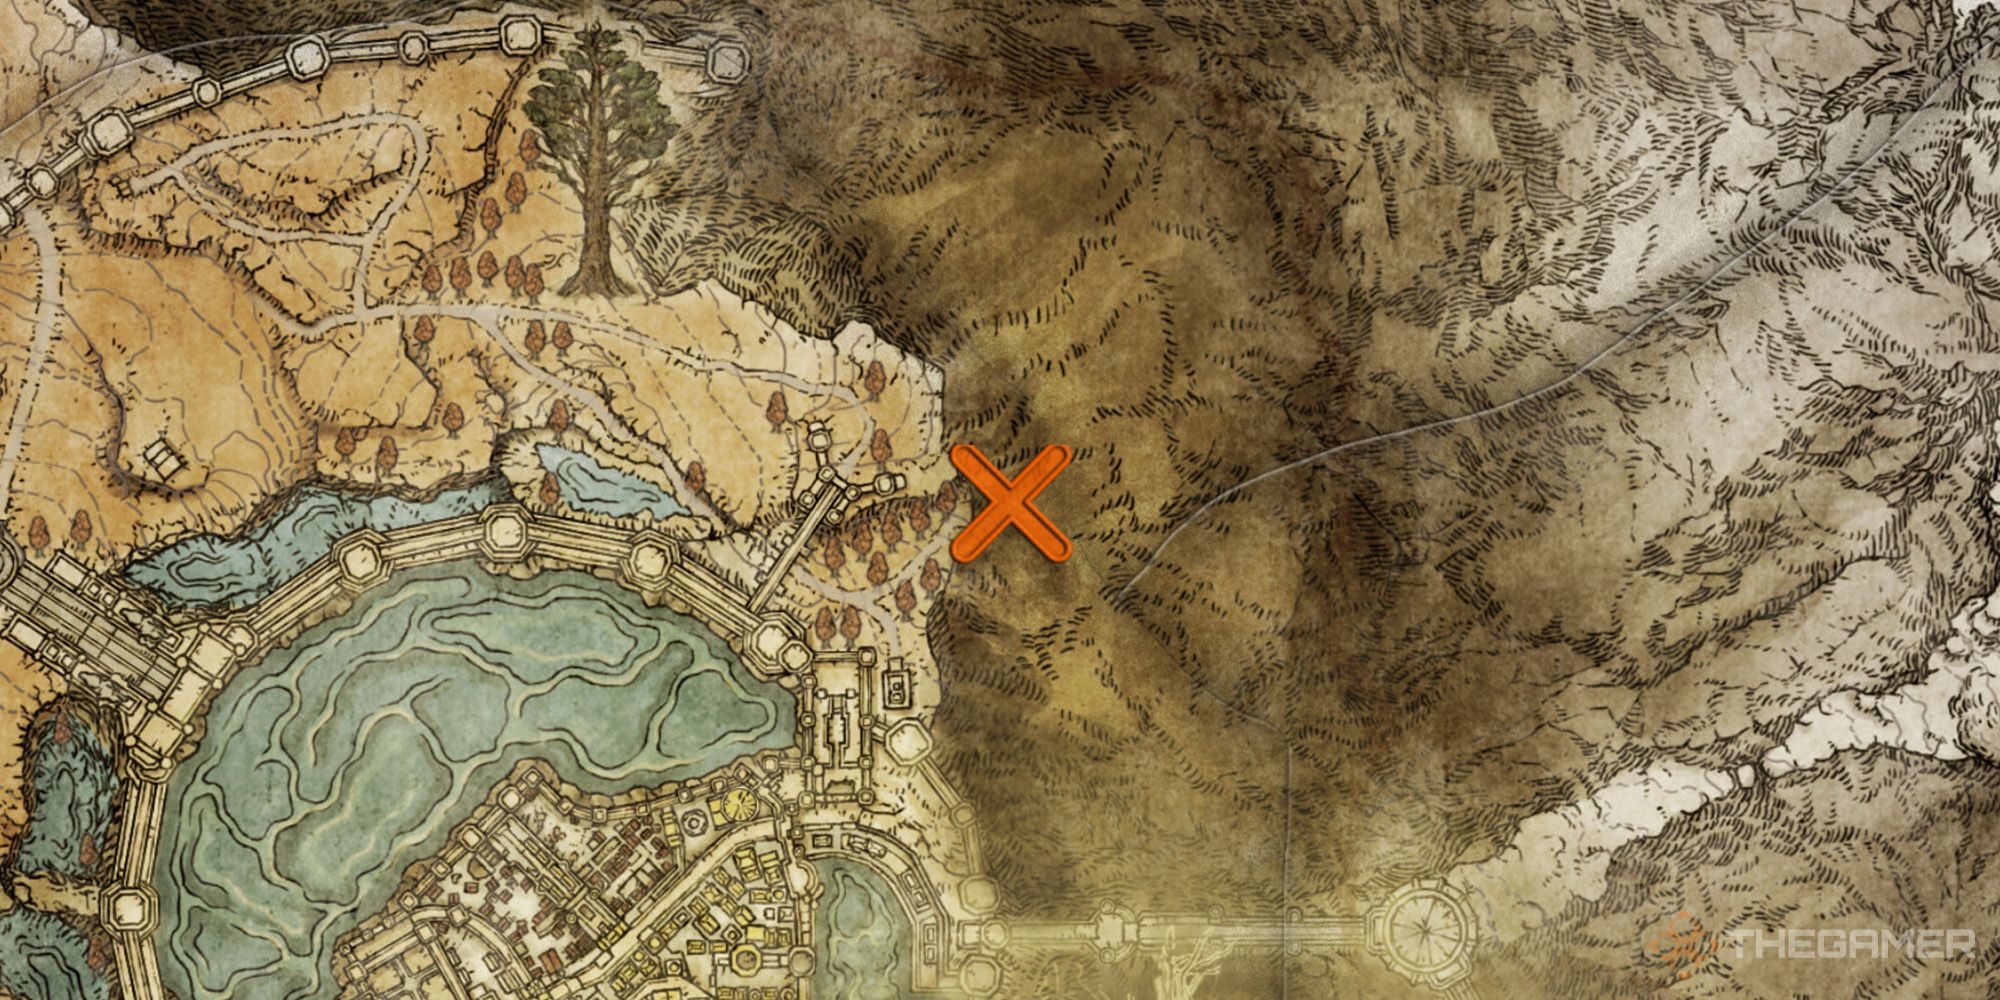 Elden Ring Map showing the location of Perfumer's Cookbook [3]